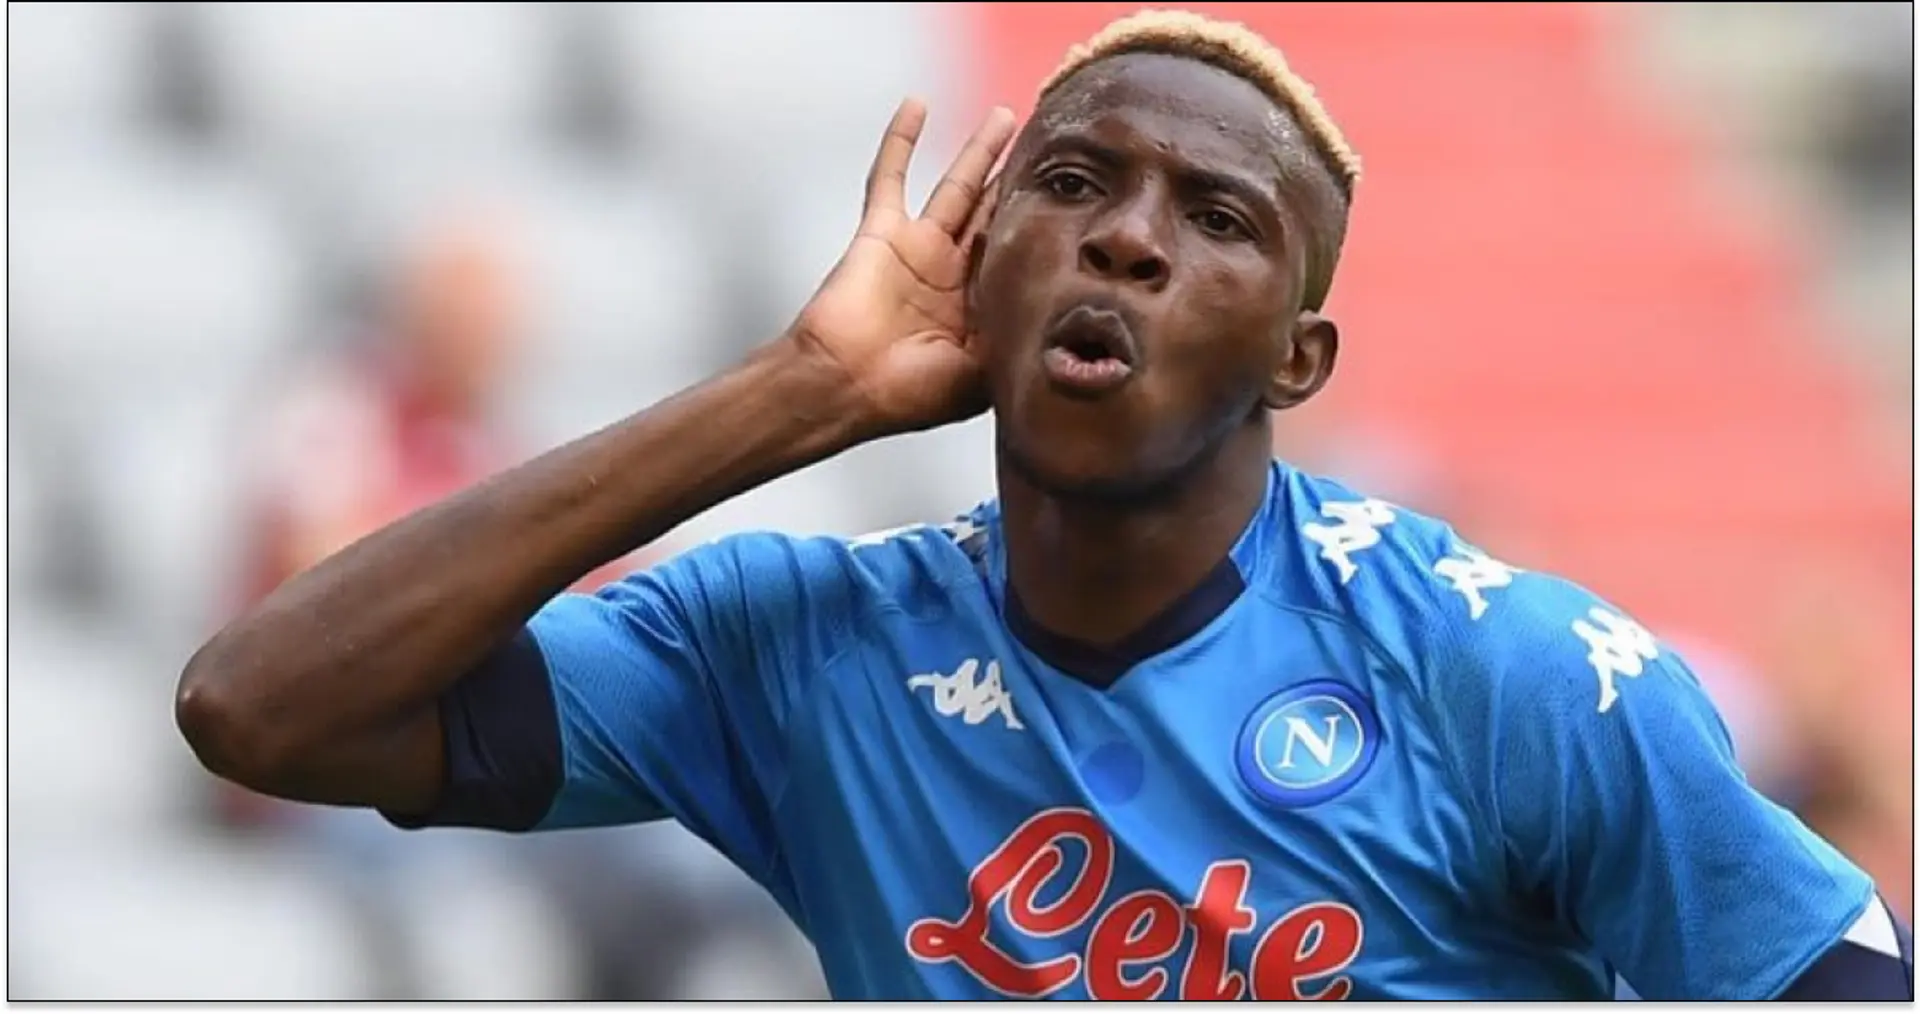 Liverpool linked with Osimhen move as Napoli open to €100m sale (reliability: 3 stars)